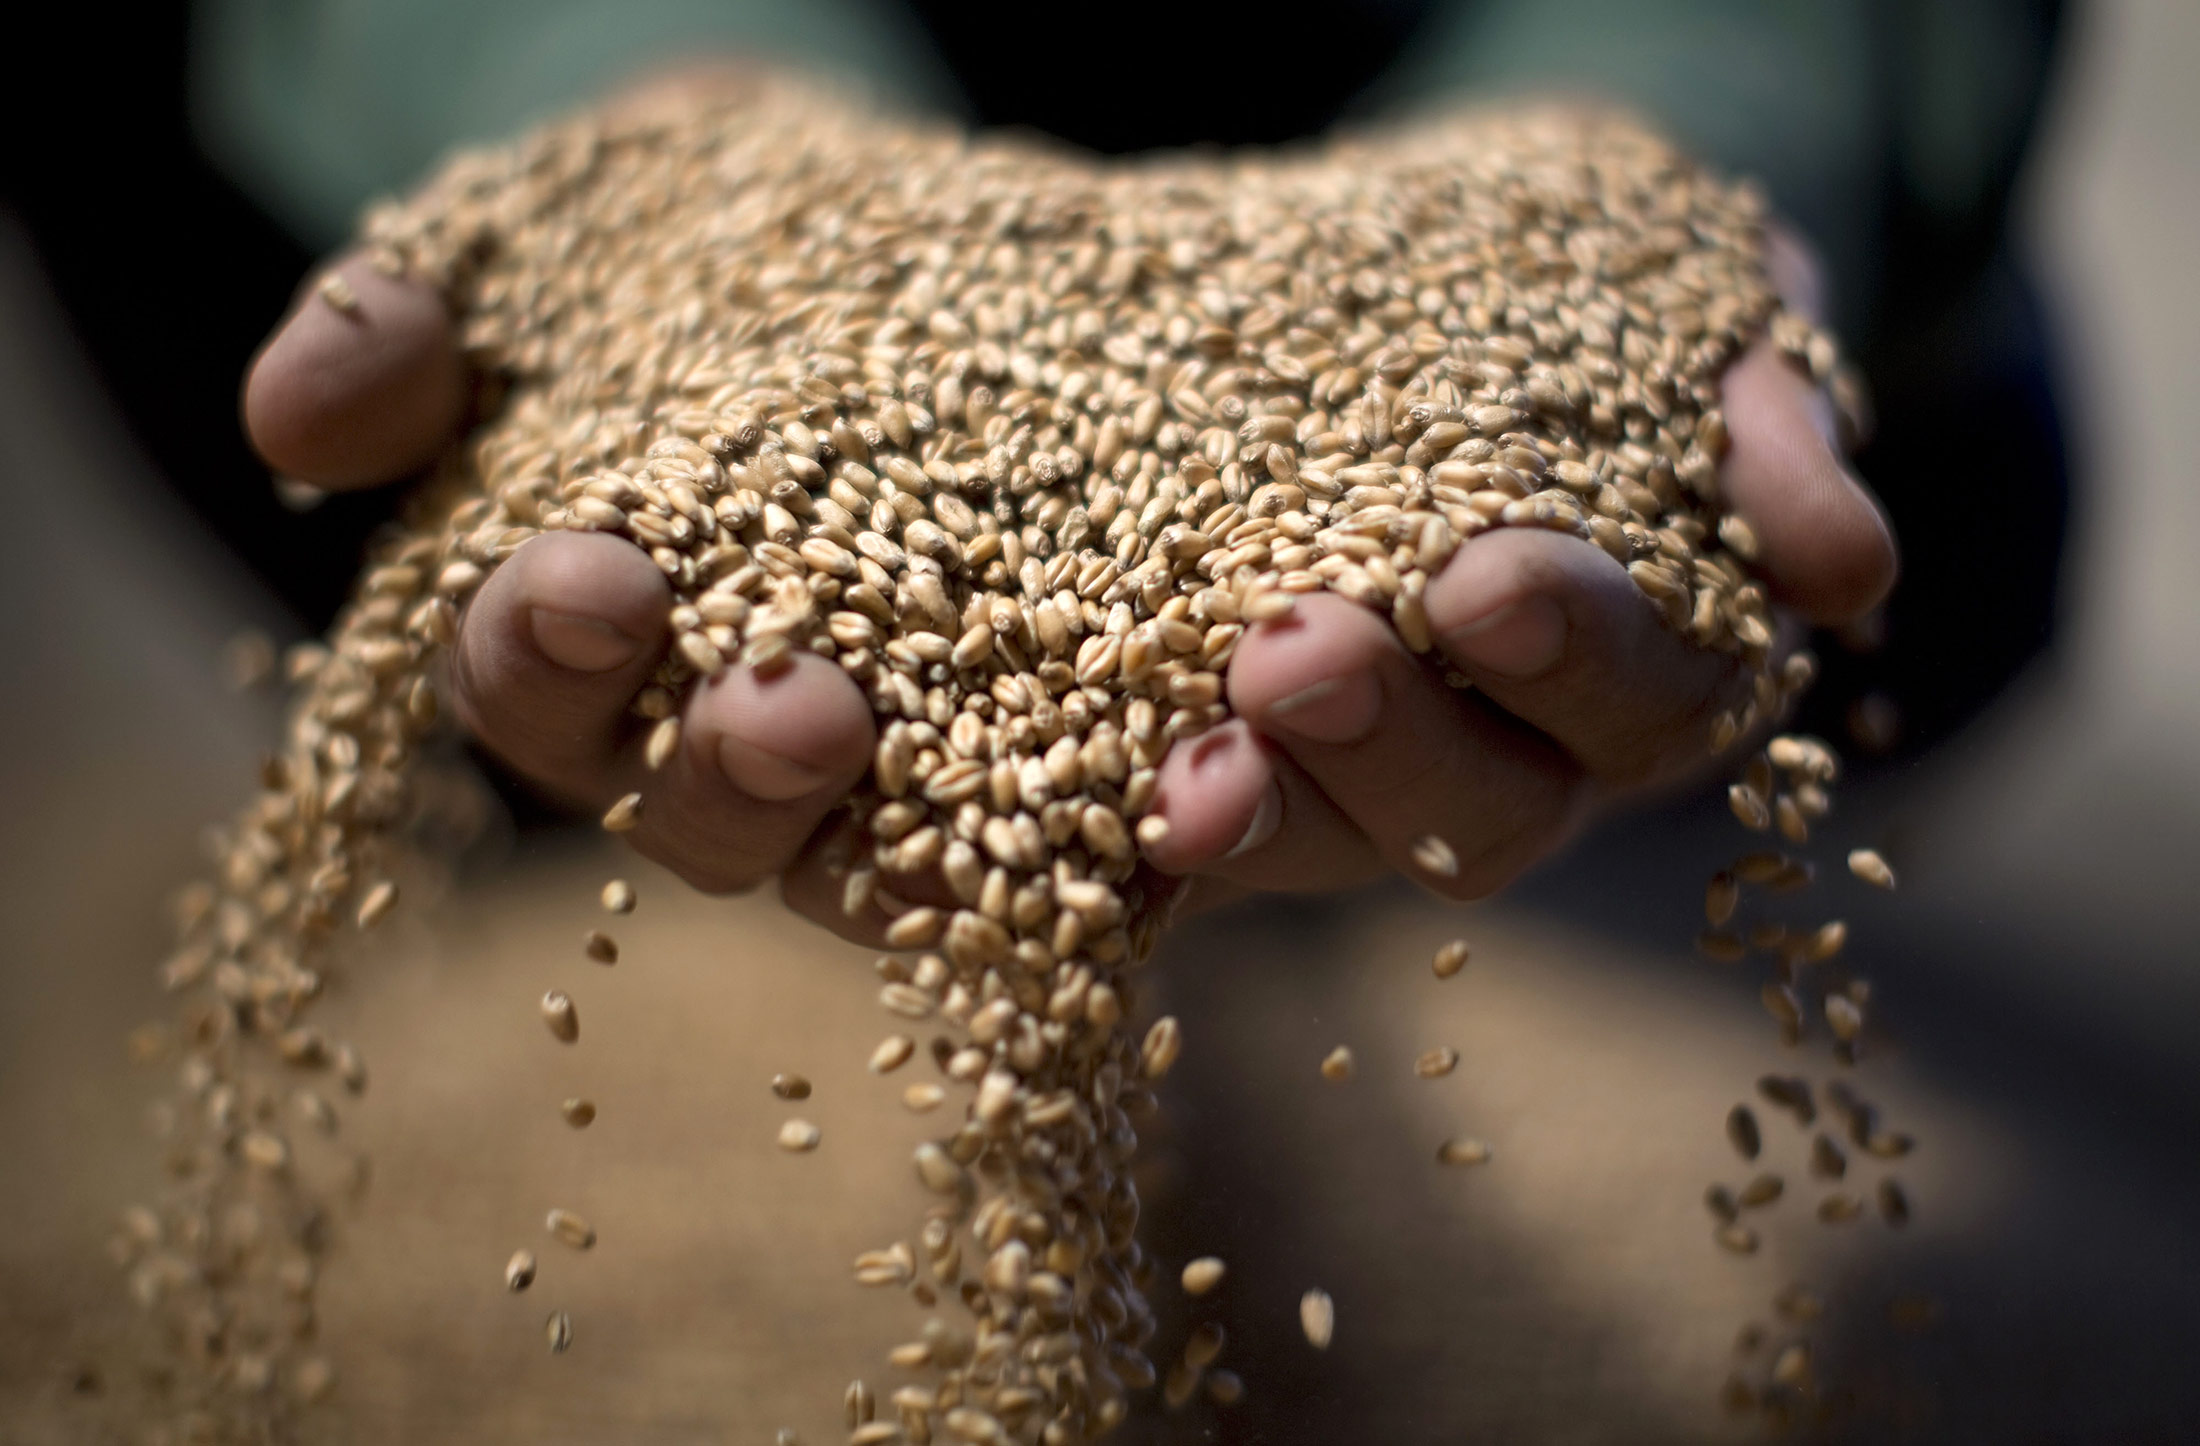 Wheat grain is held for display by a worker in this arranged photograph at a storage depot operated by Kubanskaya Korona near Kropotkin in Krasnodar, Russia, on Friday, July 13, 2012. Russia's wheat crop is estimated at 45 million metric tons, with exports at 14 million to 17 million tons, Agriculture Minister Nikolai Fedorov said.
